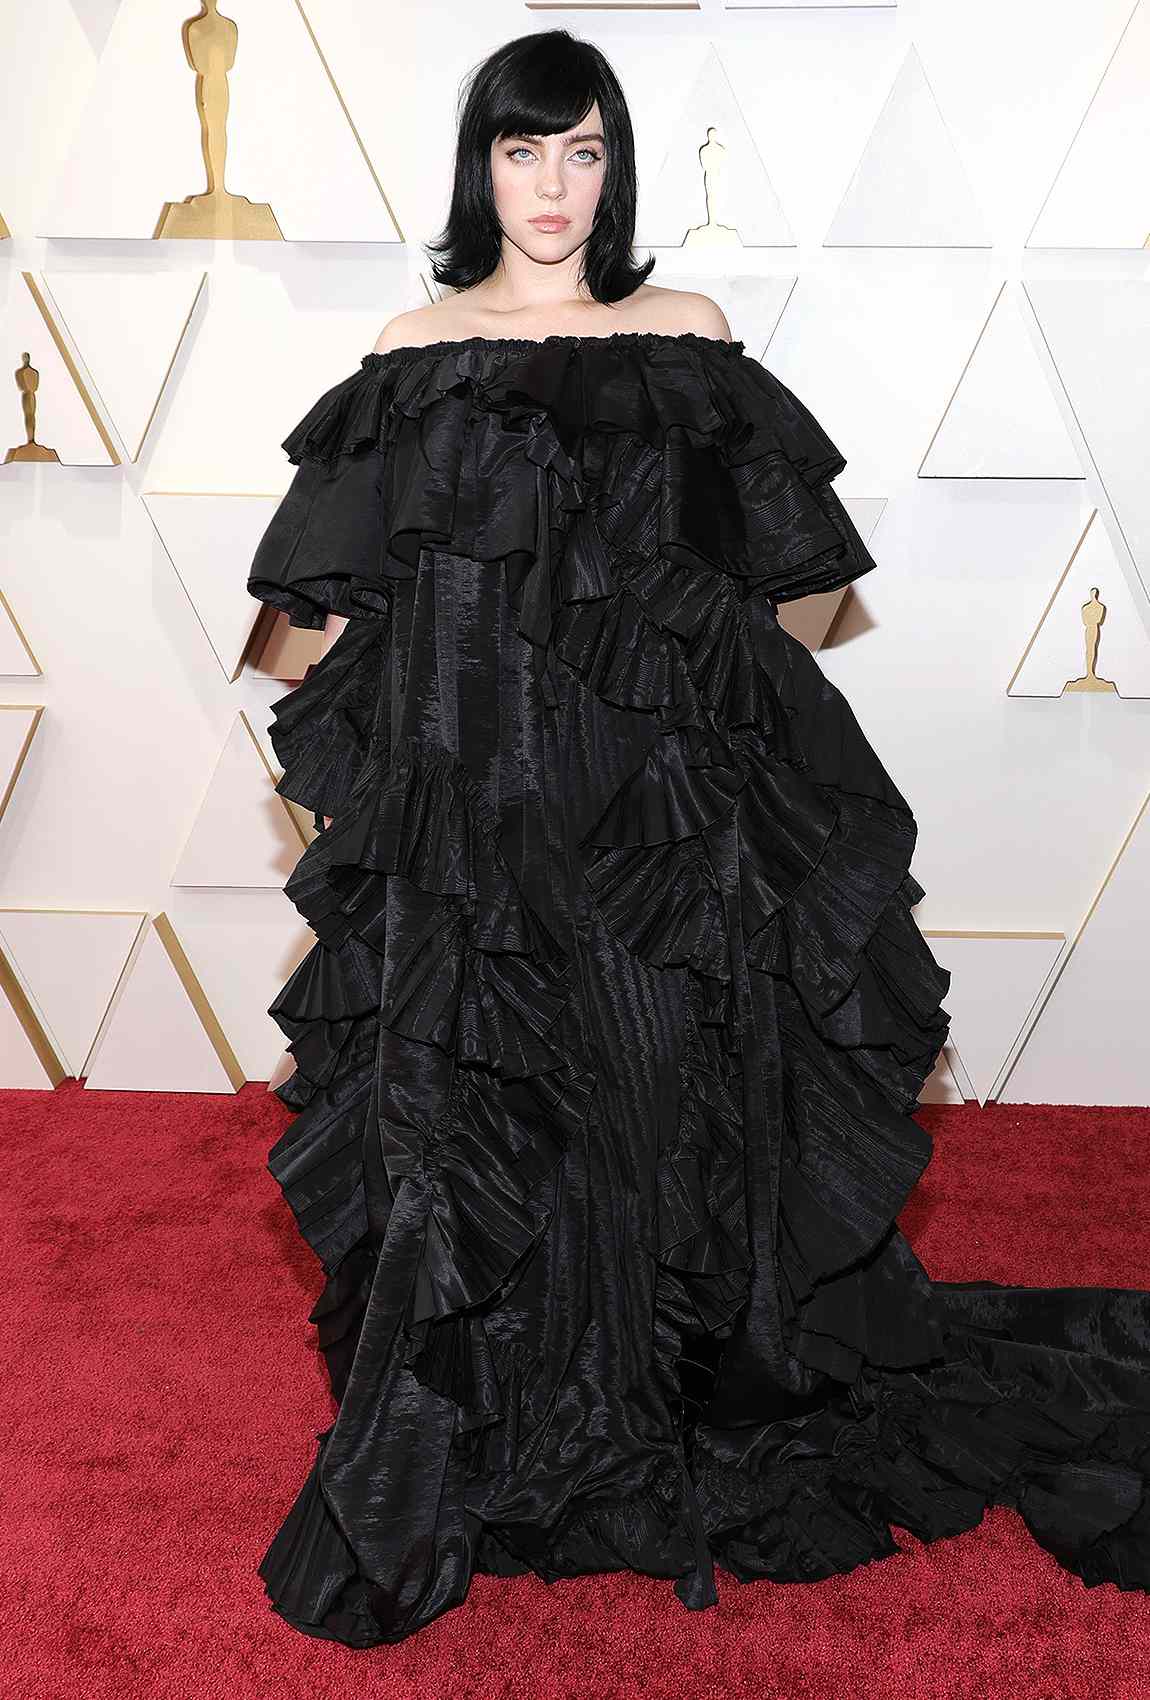 Billie Eilish Wears Black Gucci Gown to the 2022 Oscars | PEOPLE.com